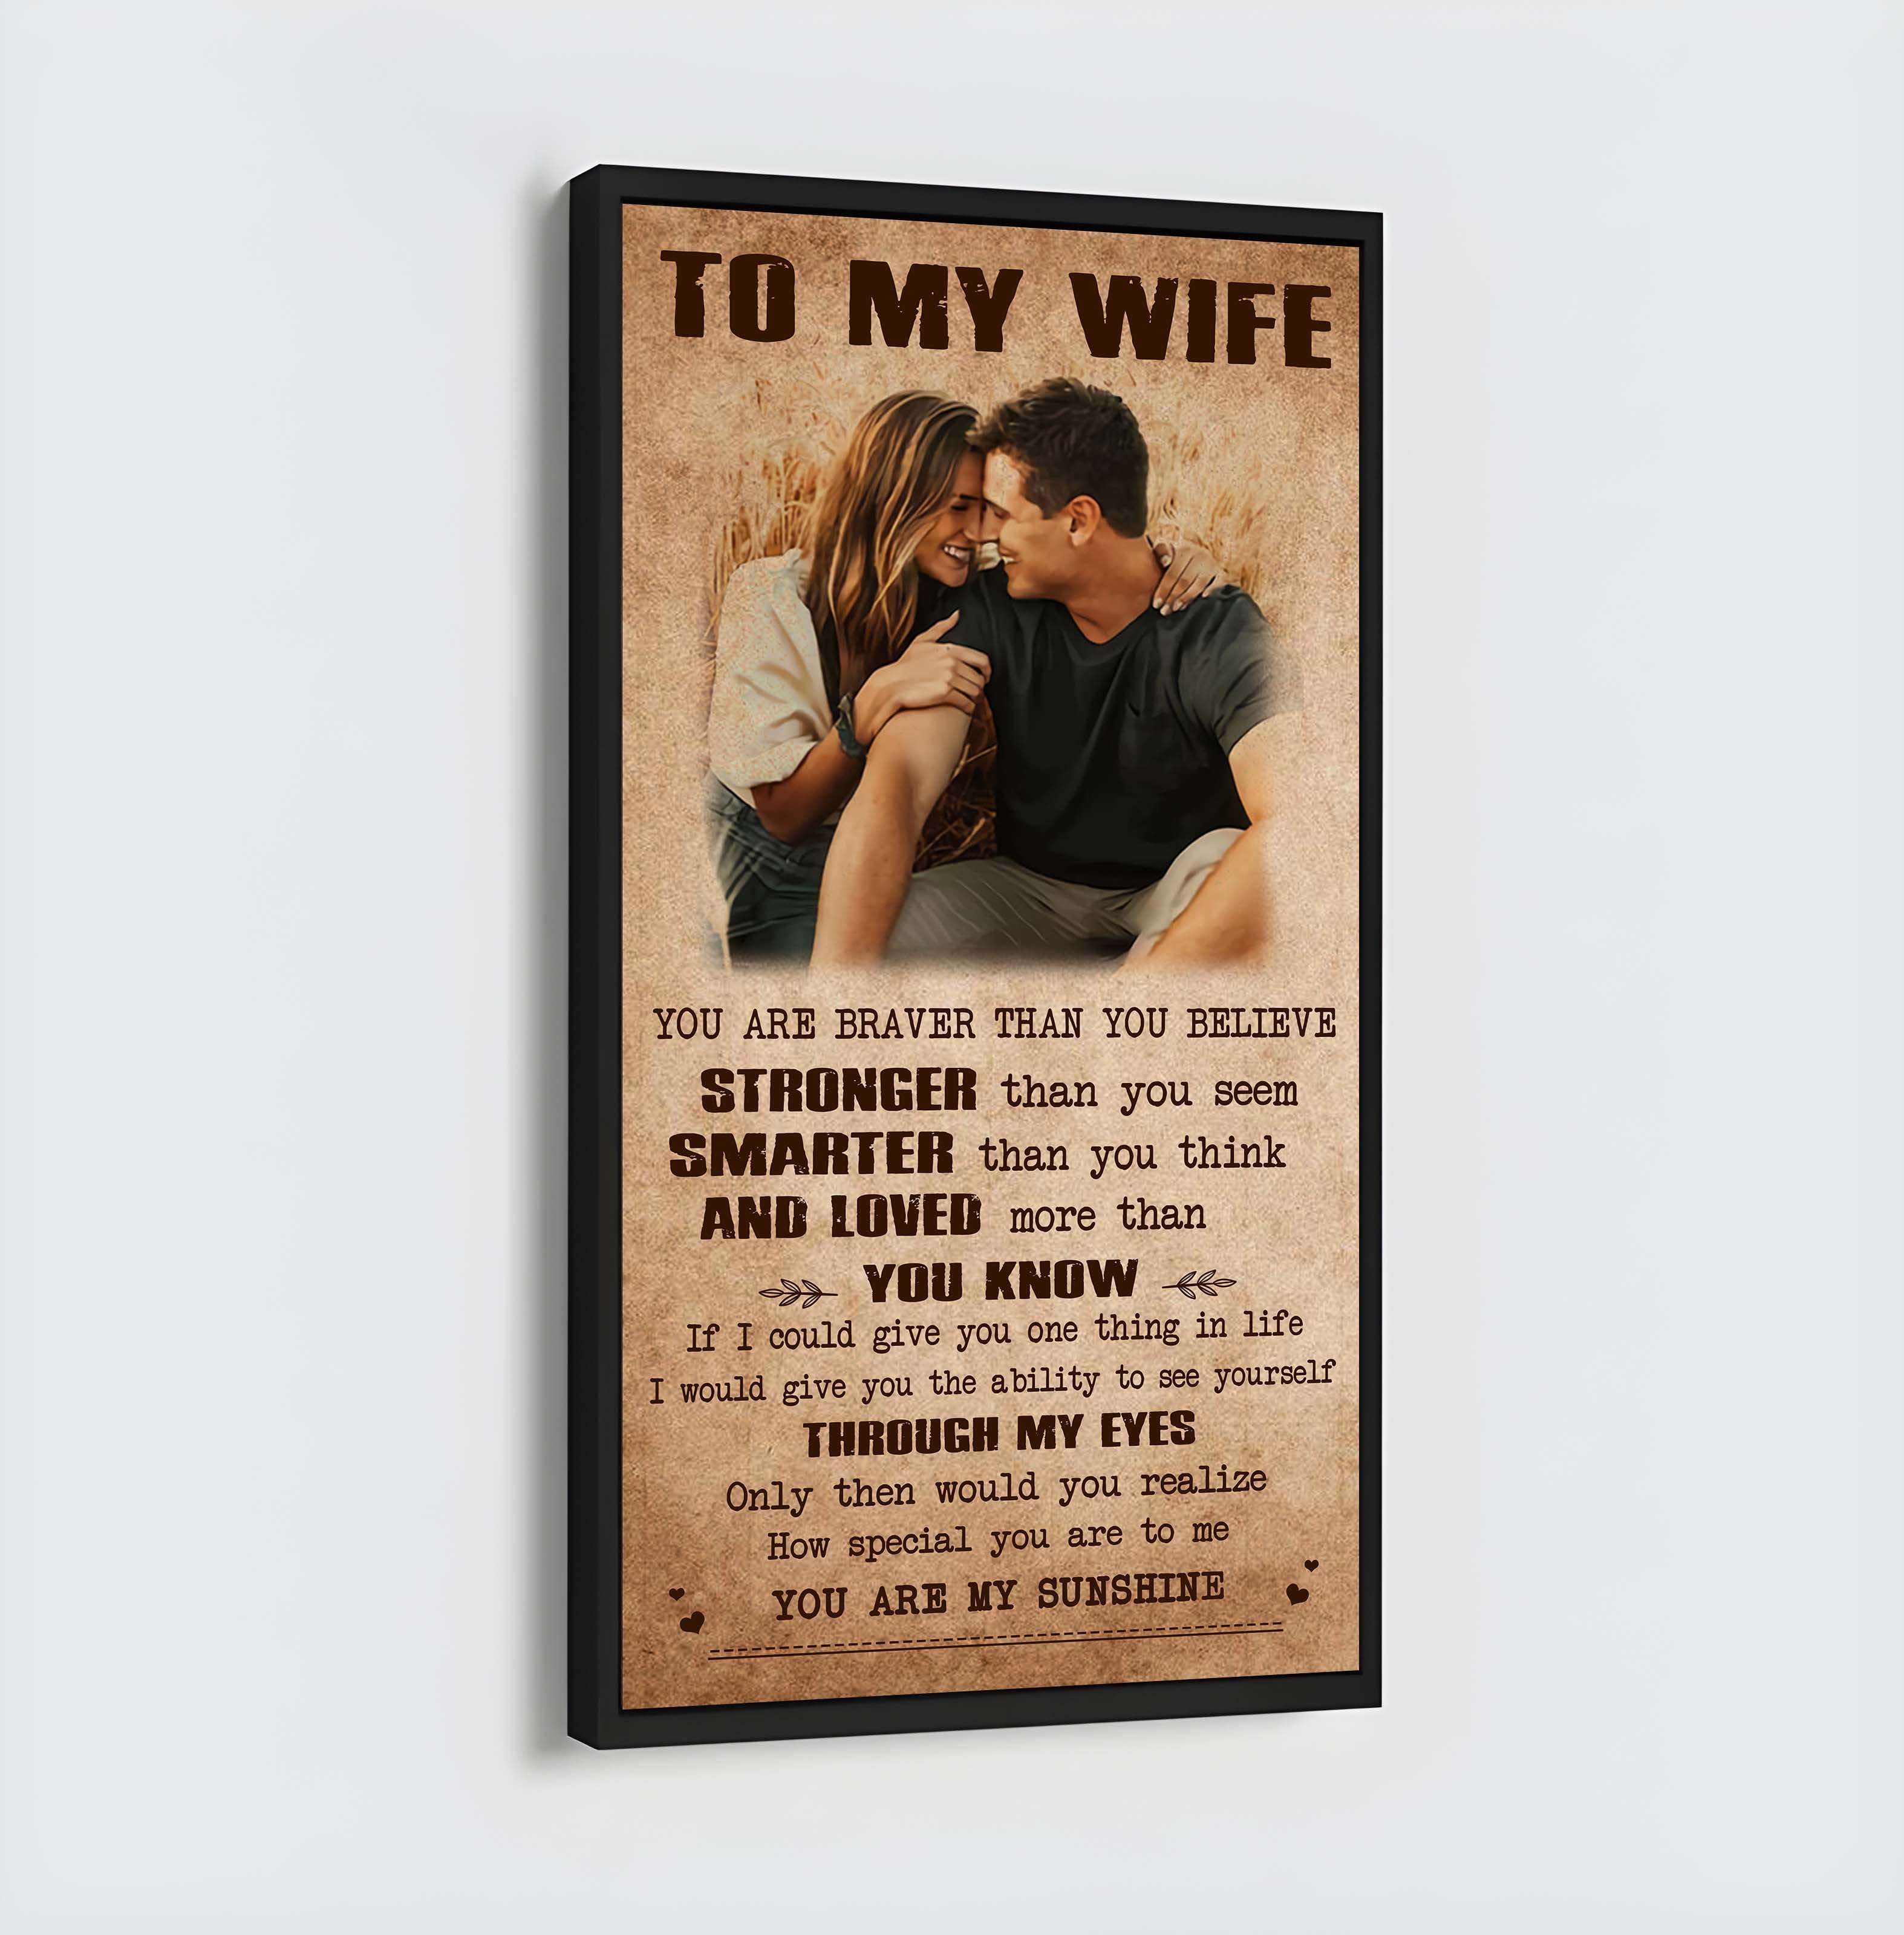 Valentine gifts-Custom image canvas-Husband to Wife- Marrying you was one of the best decision I ever made